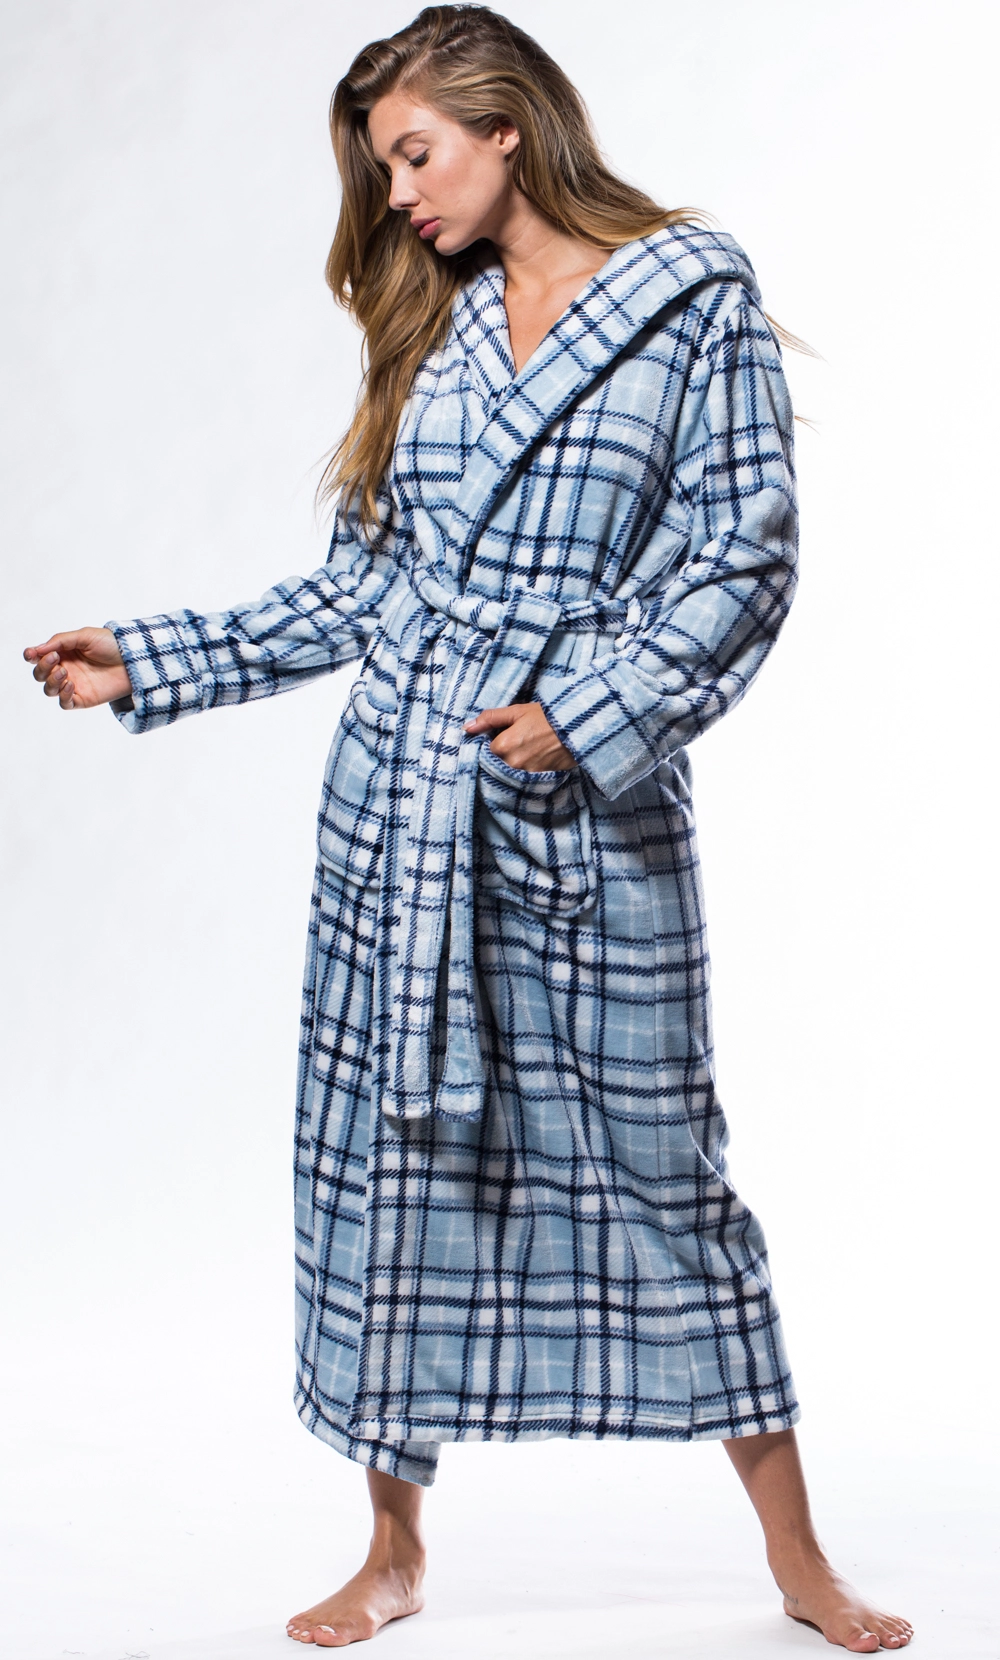 Luxury Bathrobes :: Plush Robes :: Super Soft Blue Plaid Plush Hooded  Women's Robe - Wholesale bathrobes, Spa robes, Kids robes, Cotton robes,  Spa Slippers, Wholesale Towels